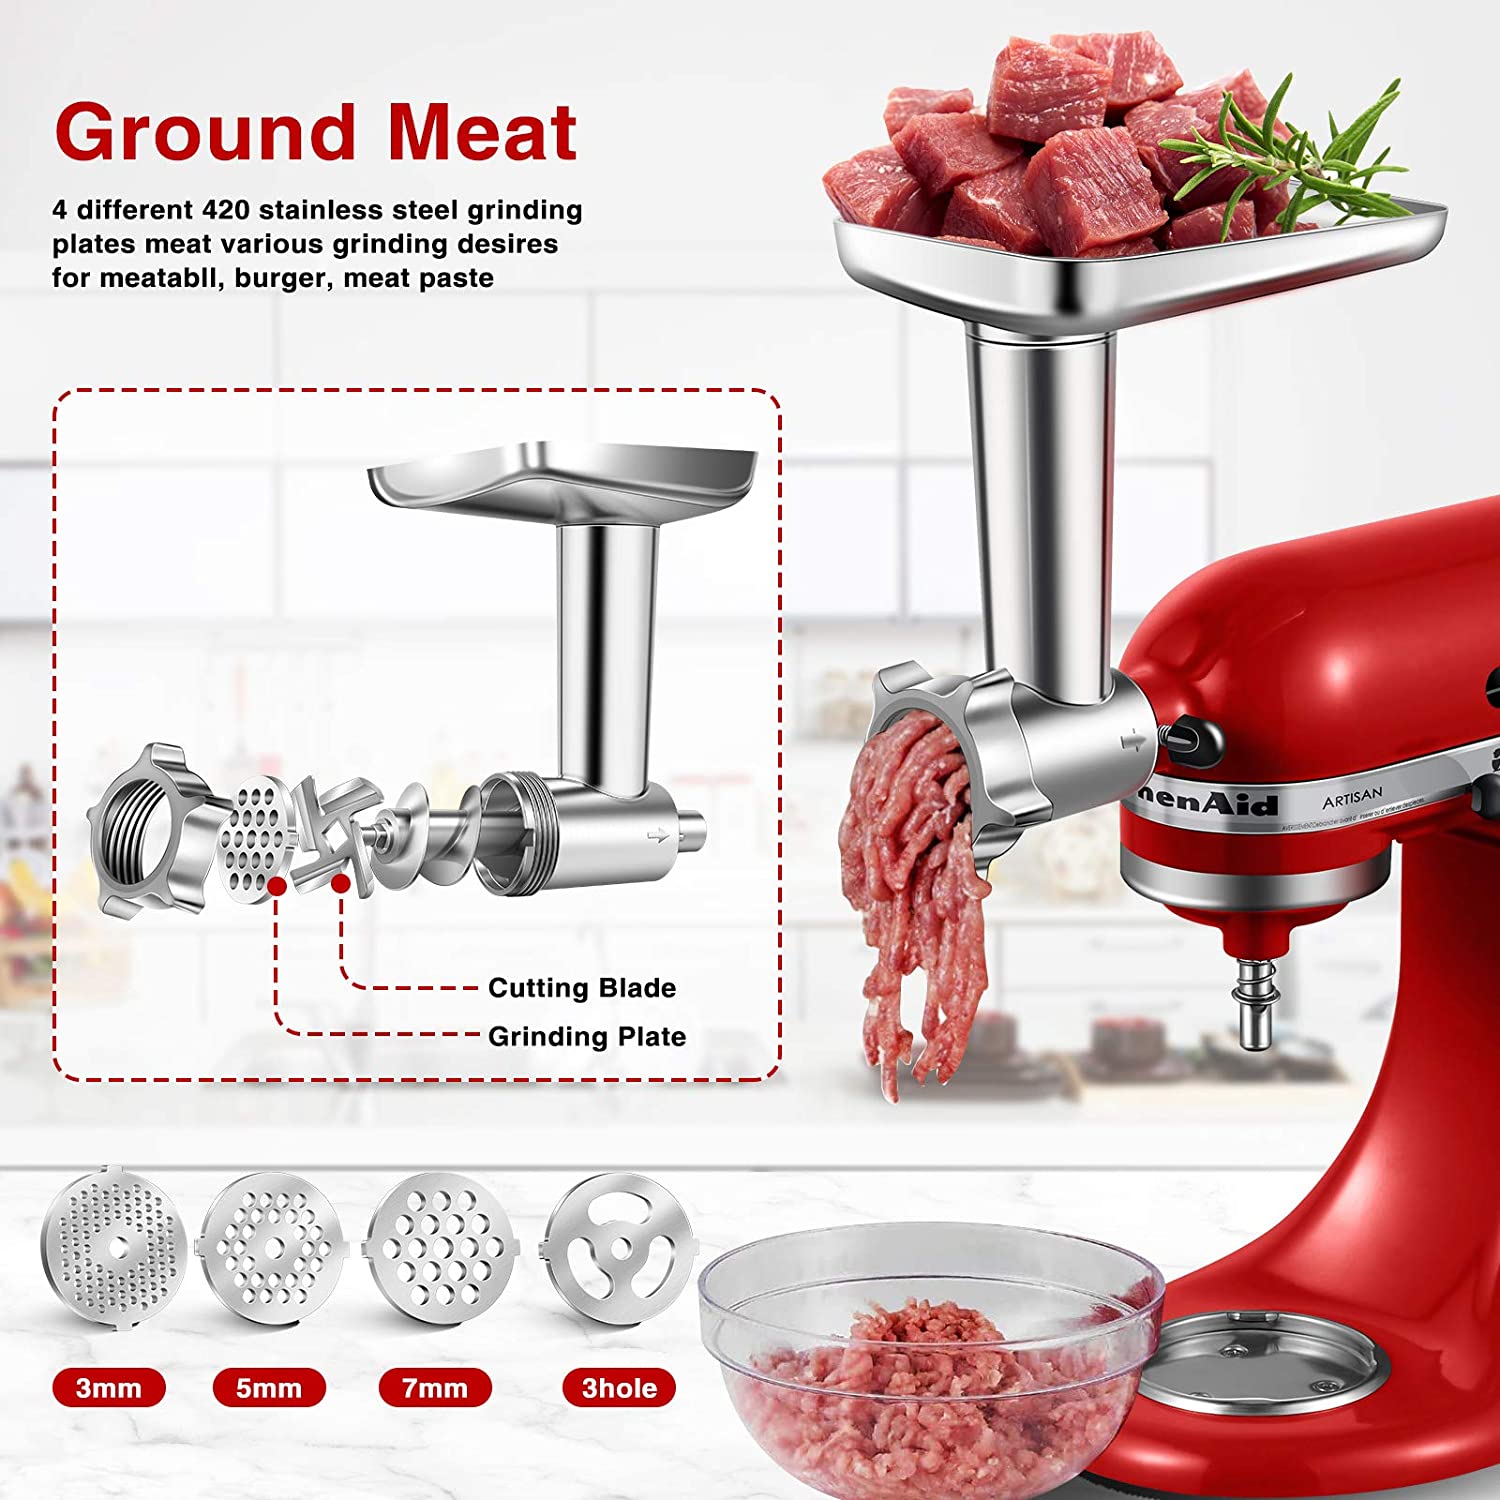 Metal Food Grinder Attachment for KitchenAid Stand Mixers, AMZCHEF Meat Grinder Attachment Included 3 Sausage Stuffer Tubes & A Holder,4 Grinding Plates,2 Grinding Blades, Burger Press,Cleaning Brush